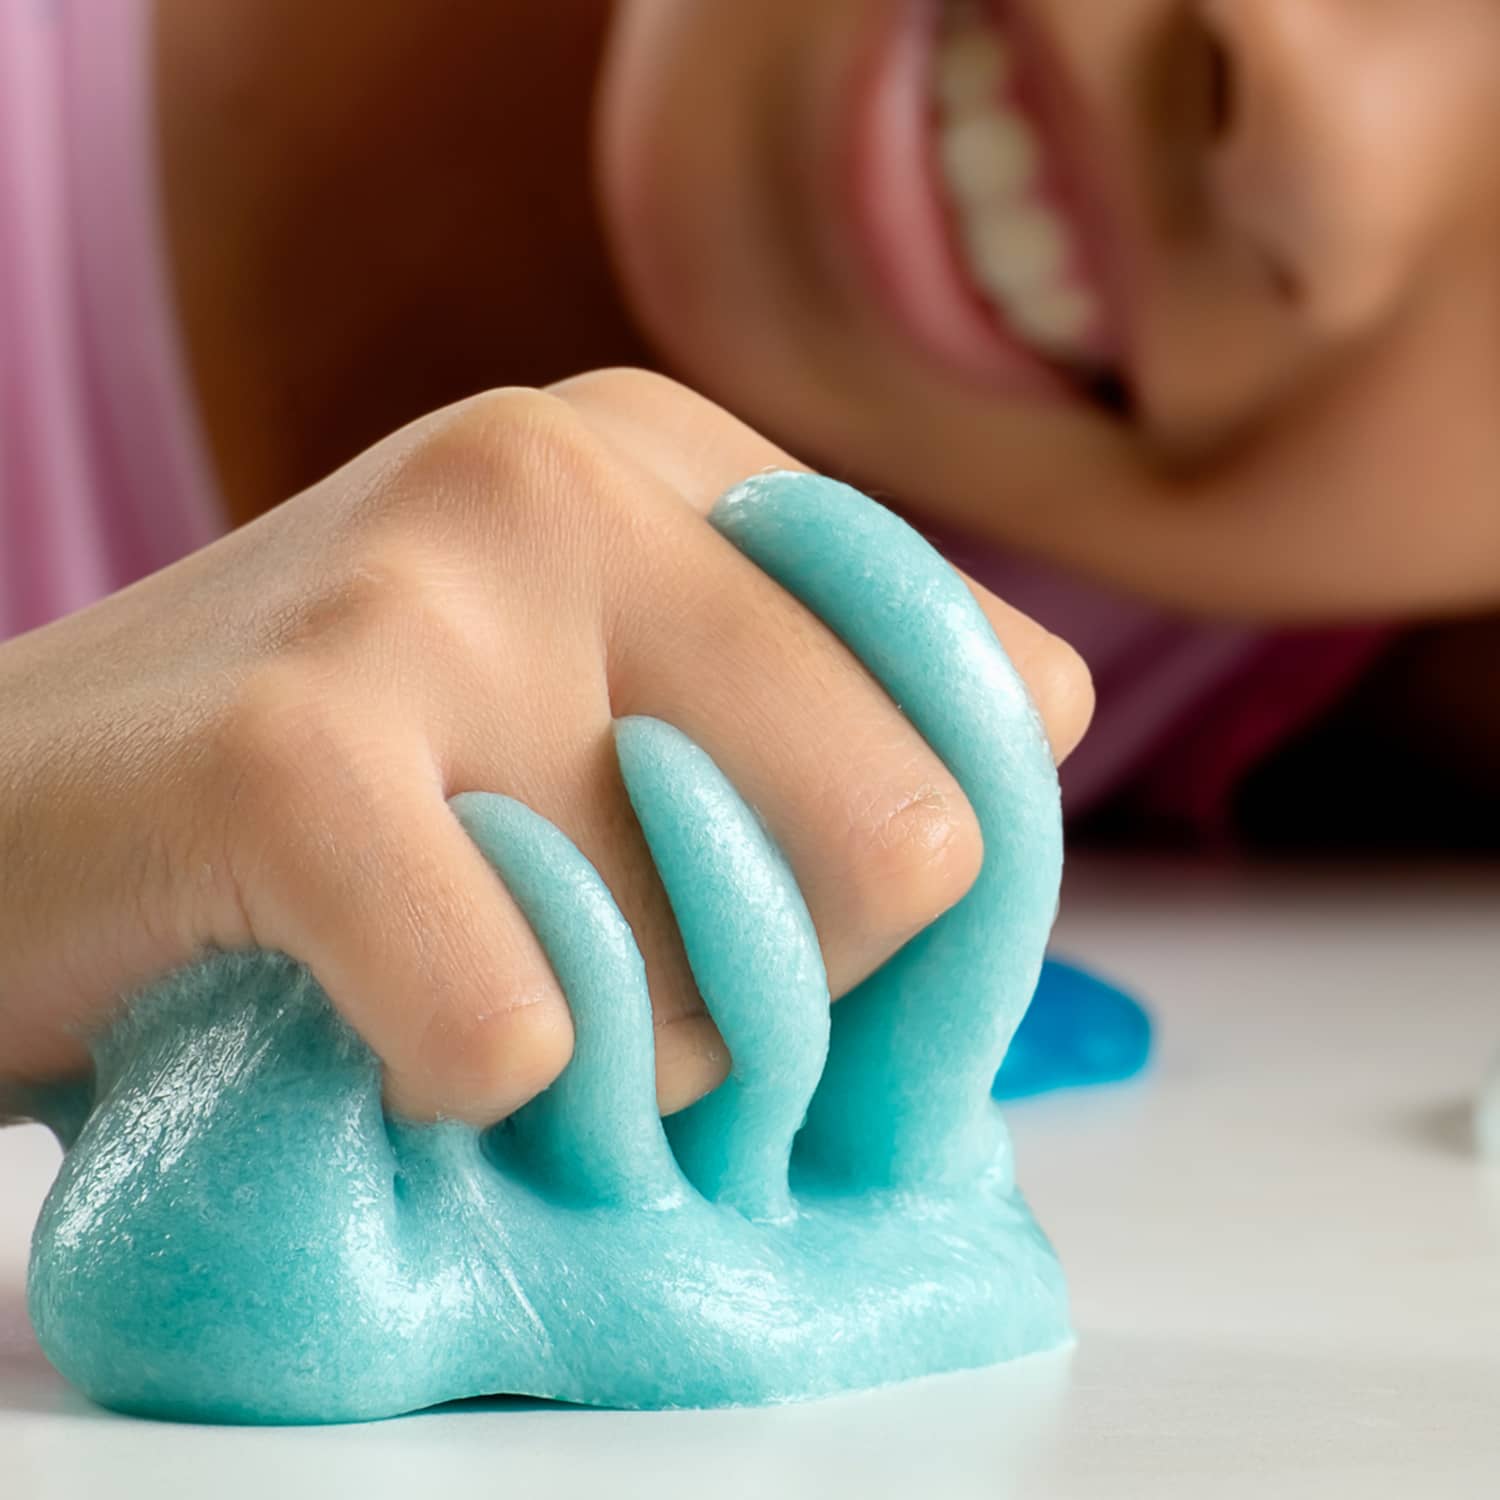 How to make car cleaning slime #howto #cleantok #carcleaningslime #sli, Slime